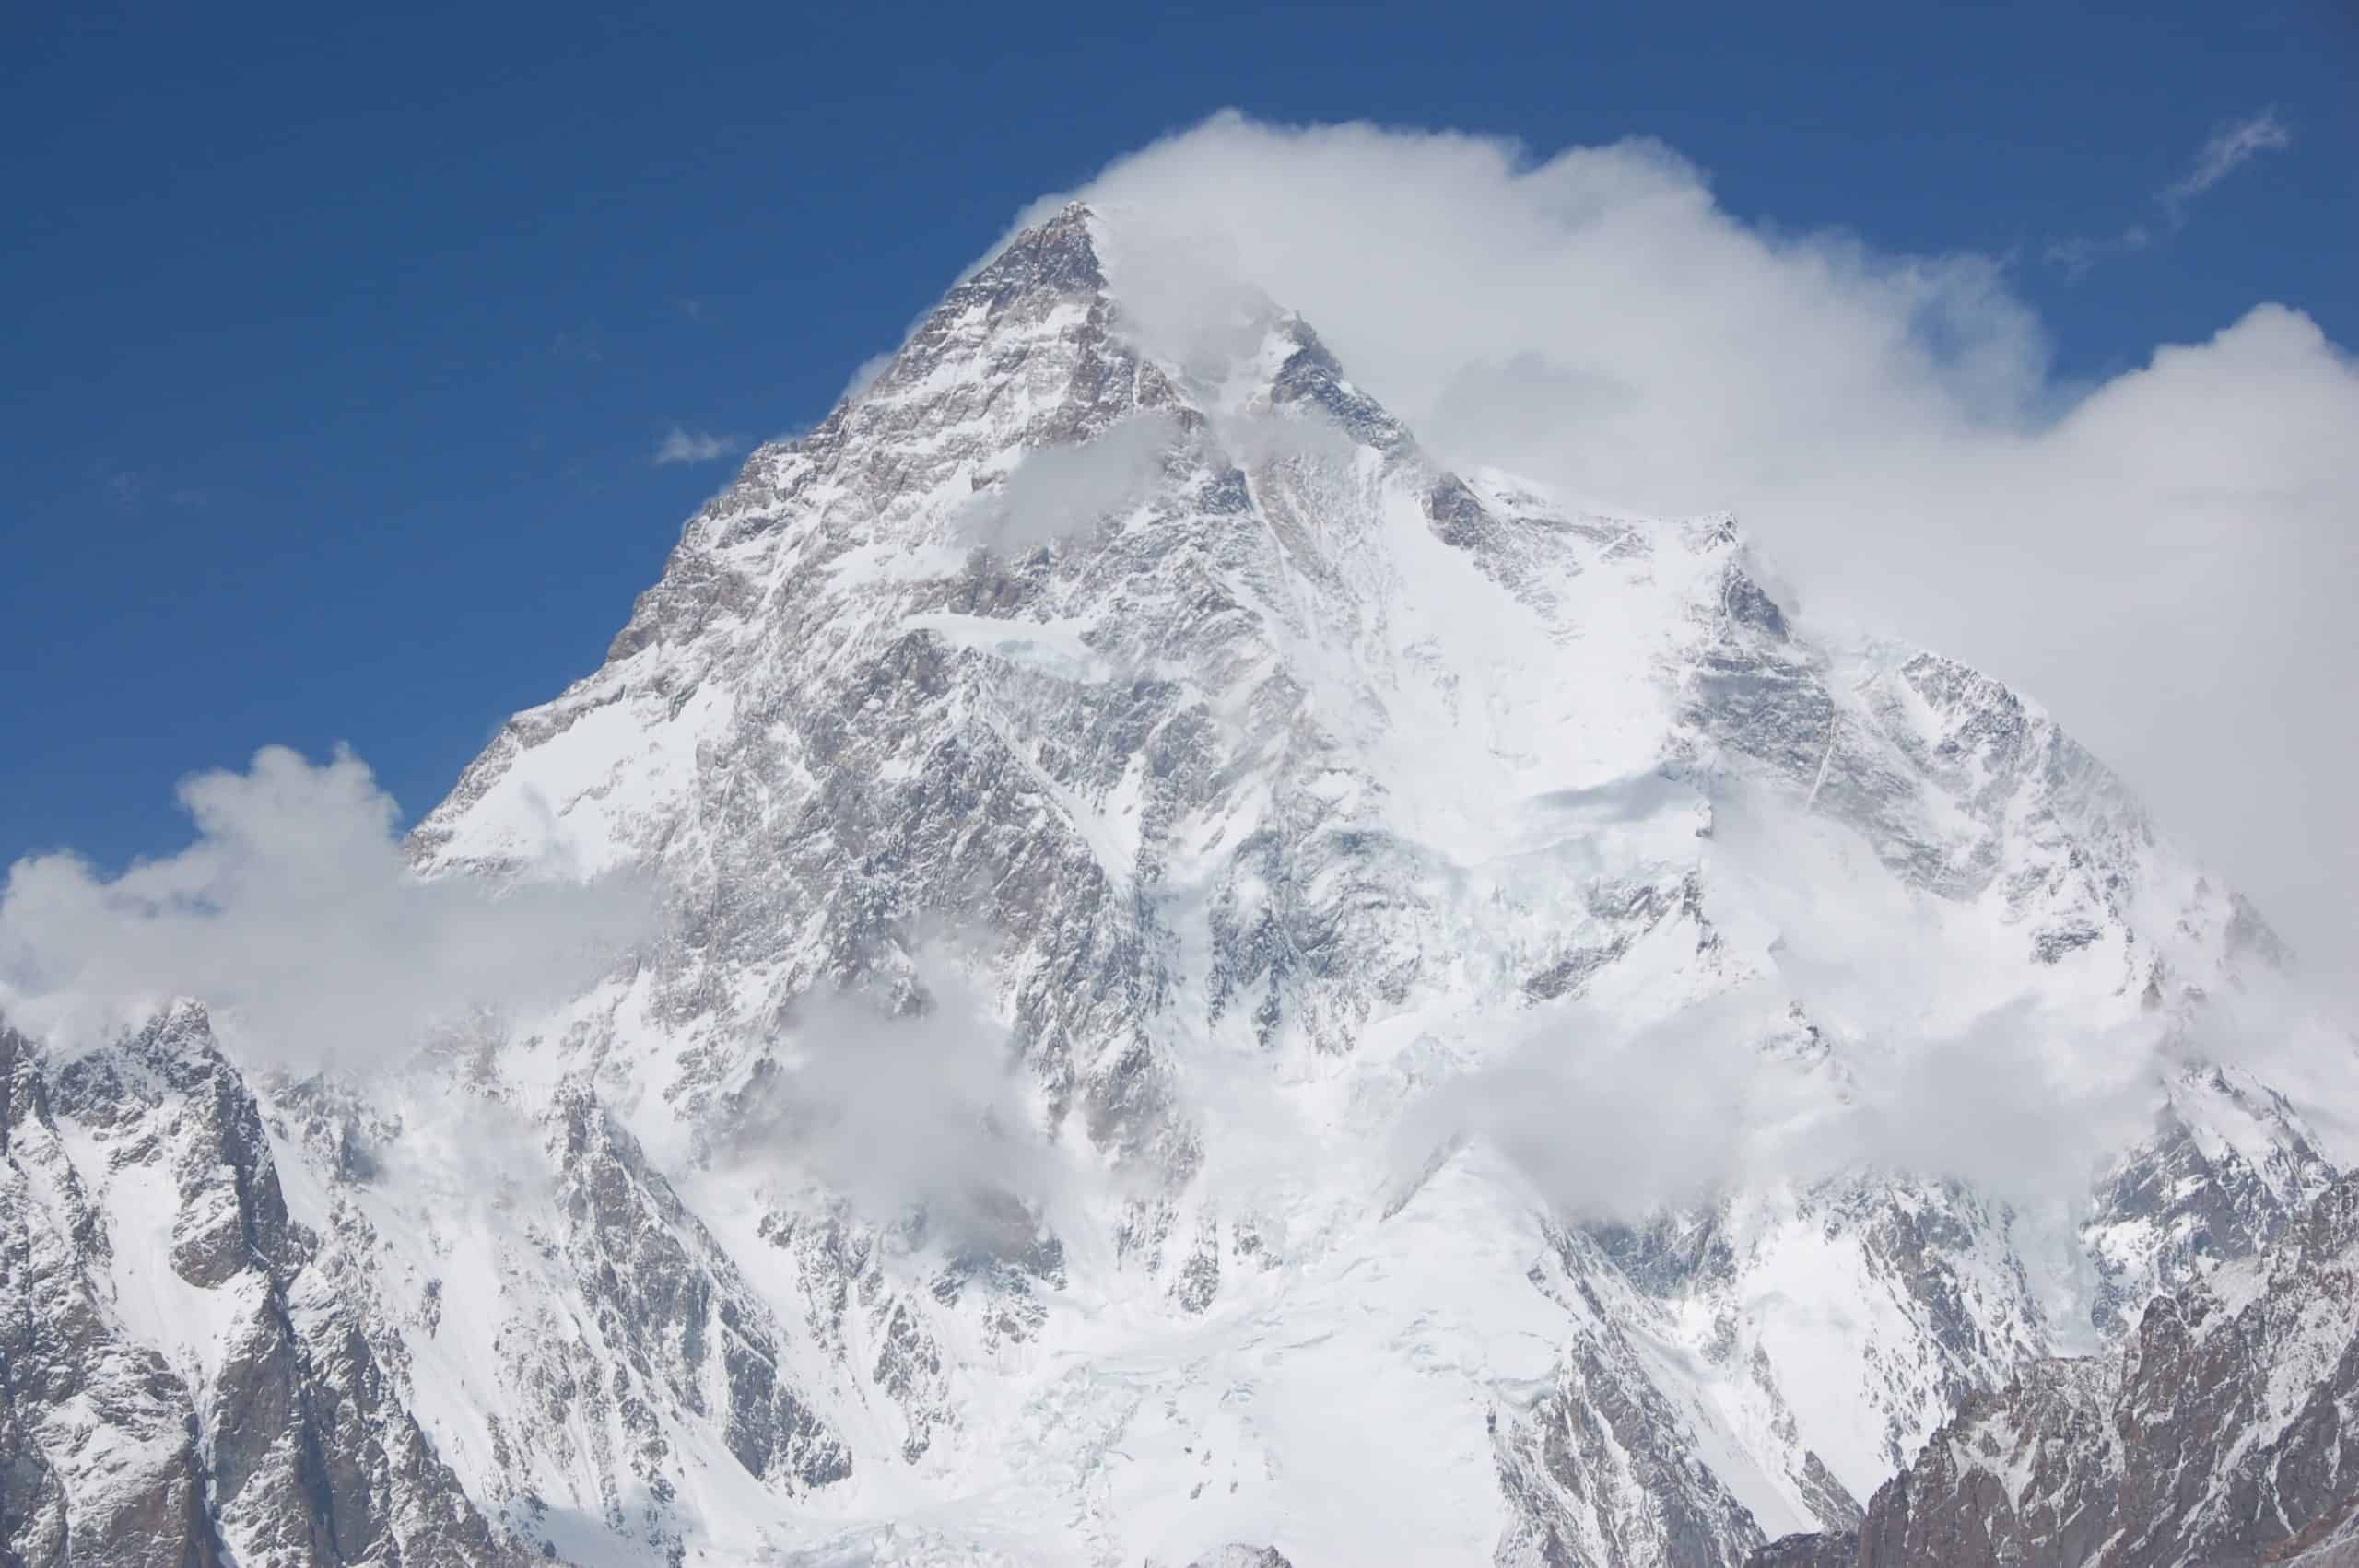 Himalayan: K2 conquered for the first time in winter! It was done by Sherpas